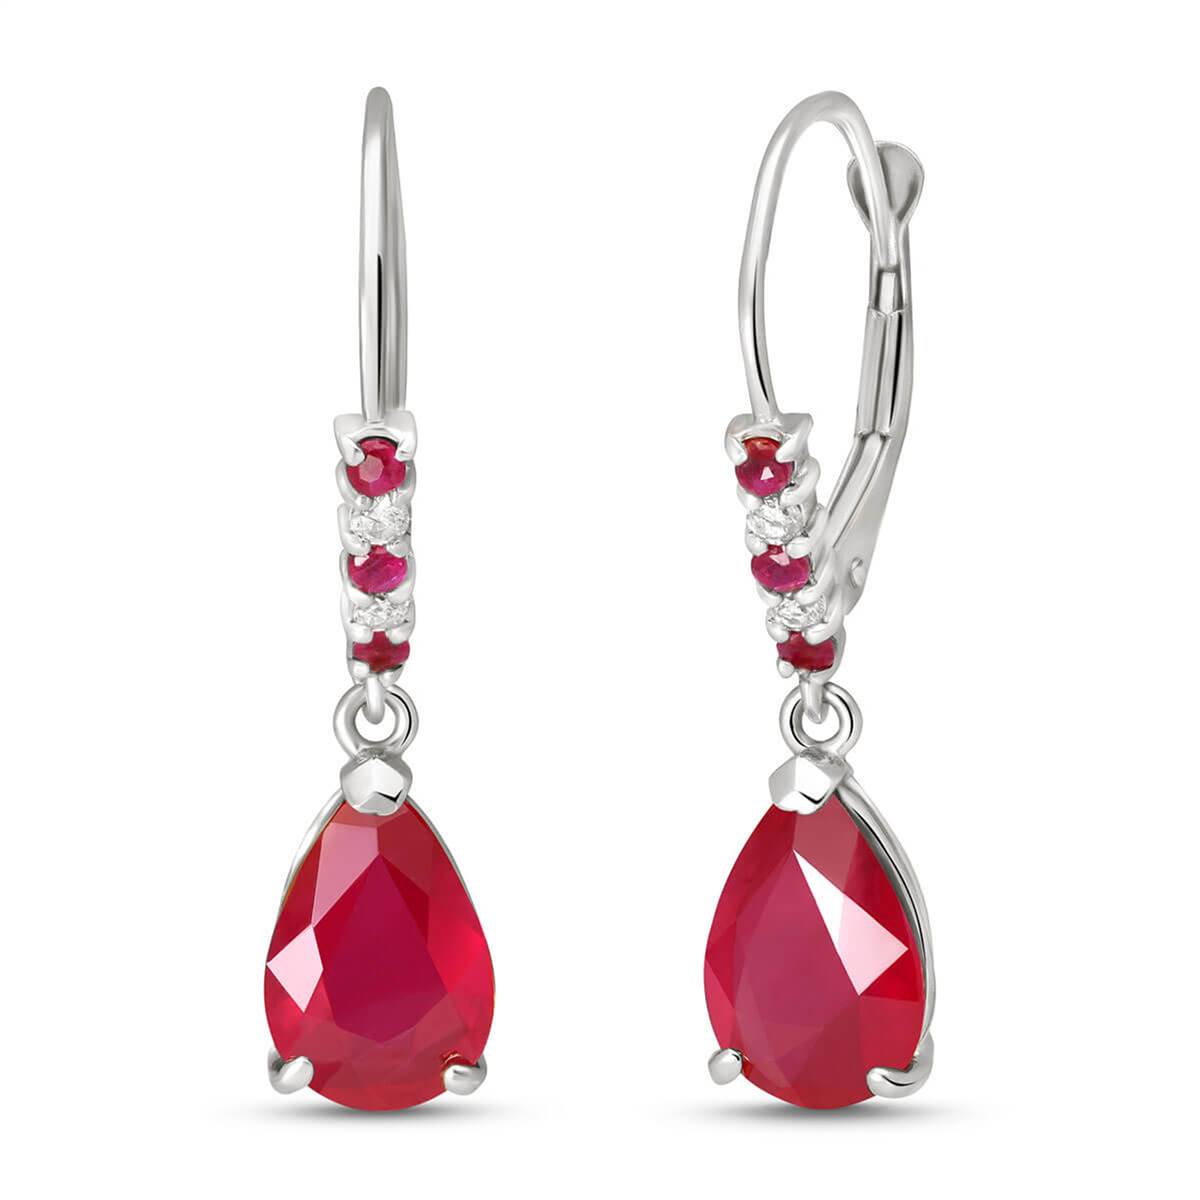 3.18 Carat 14K Solid White Gold Voyages Ruby Diamond Earrings